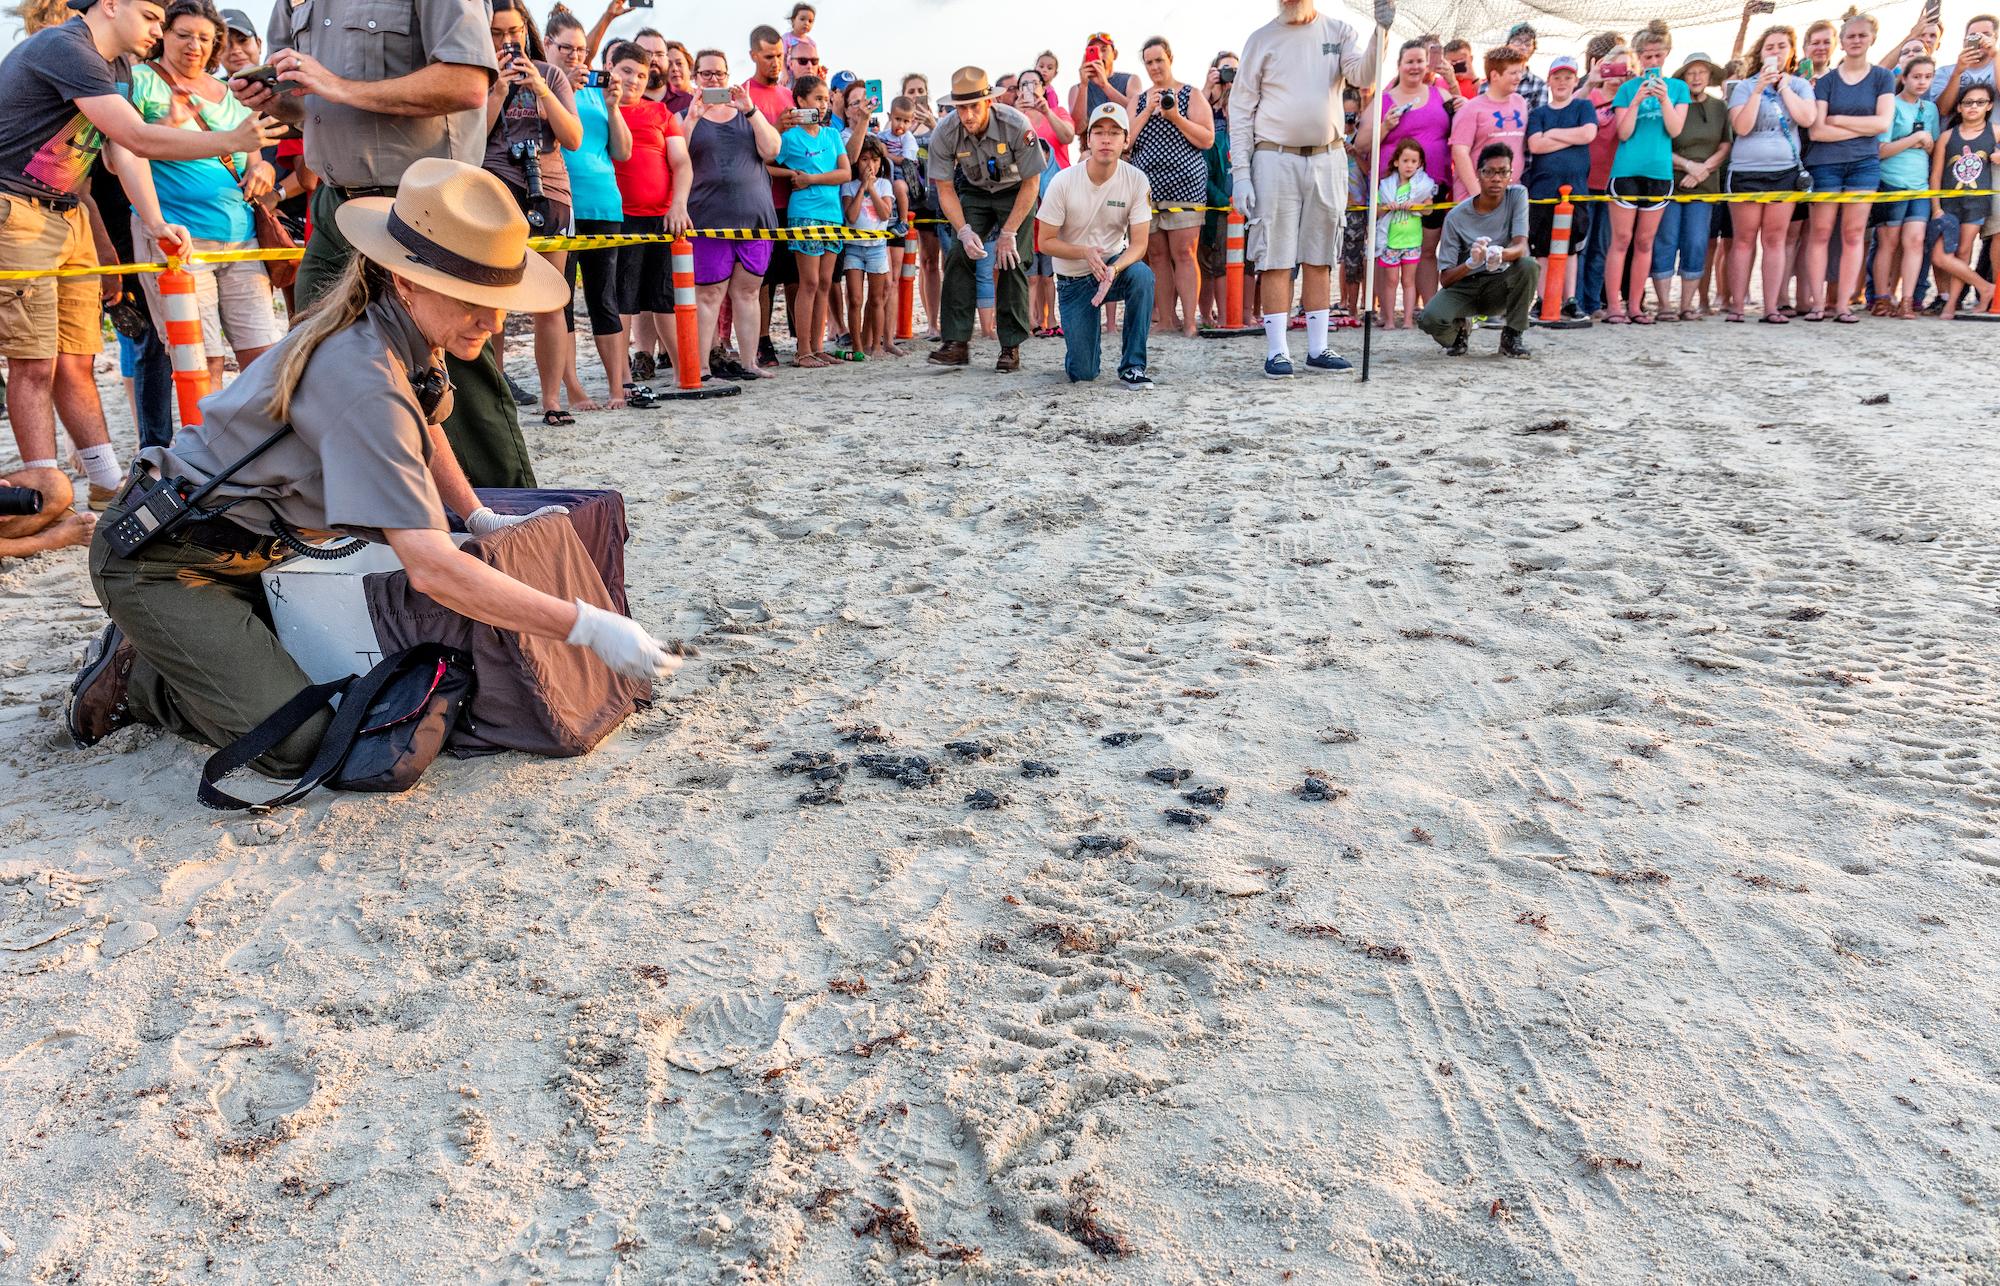 Dr. Donna Shaver, releasing hatchlings in 2017, raised public interest in sea turtles and conservation through hatchling release events/Rebecca Latson